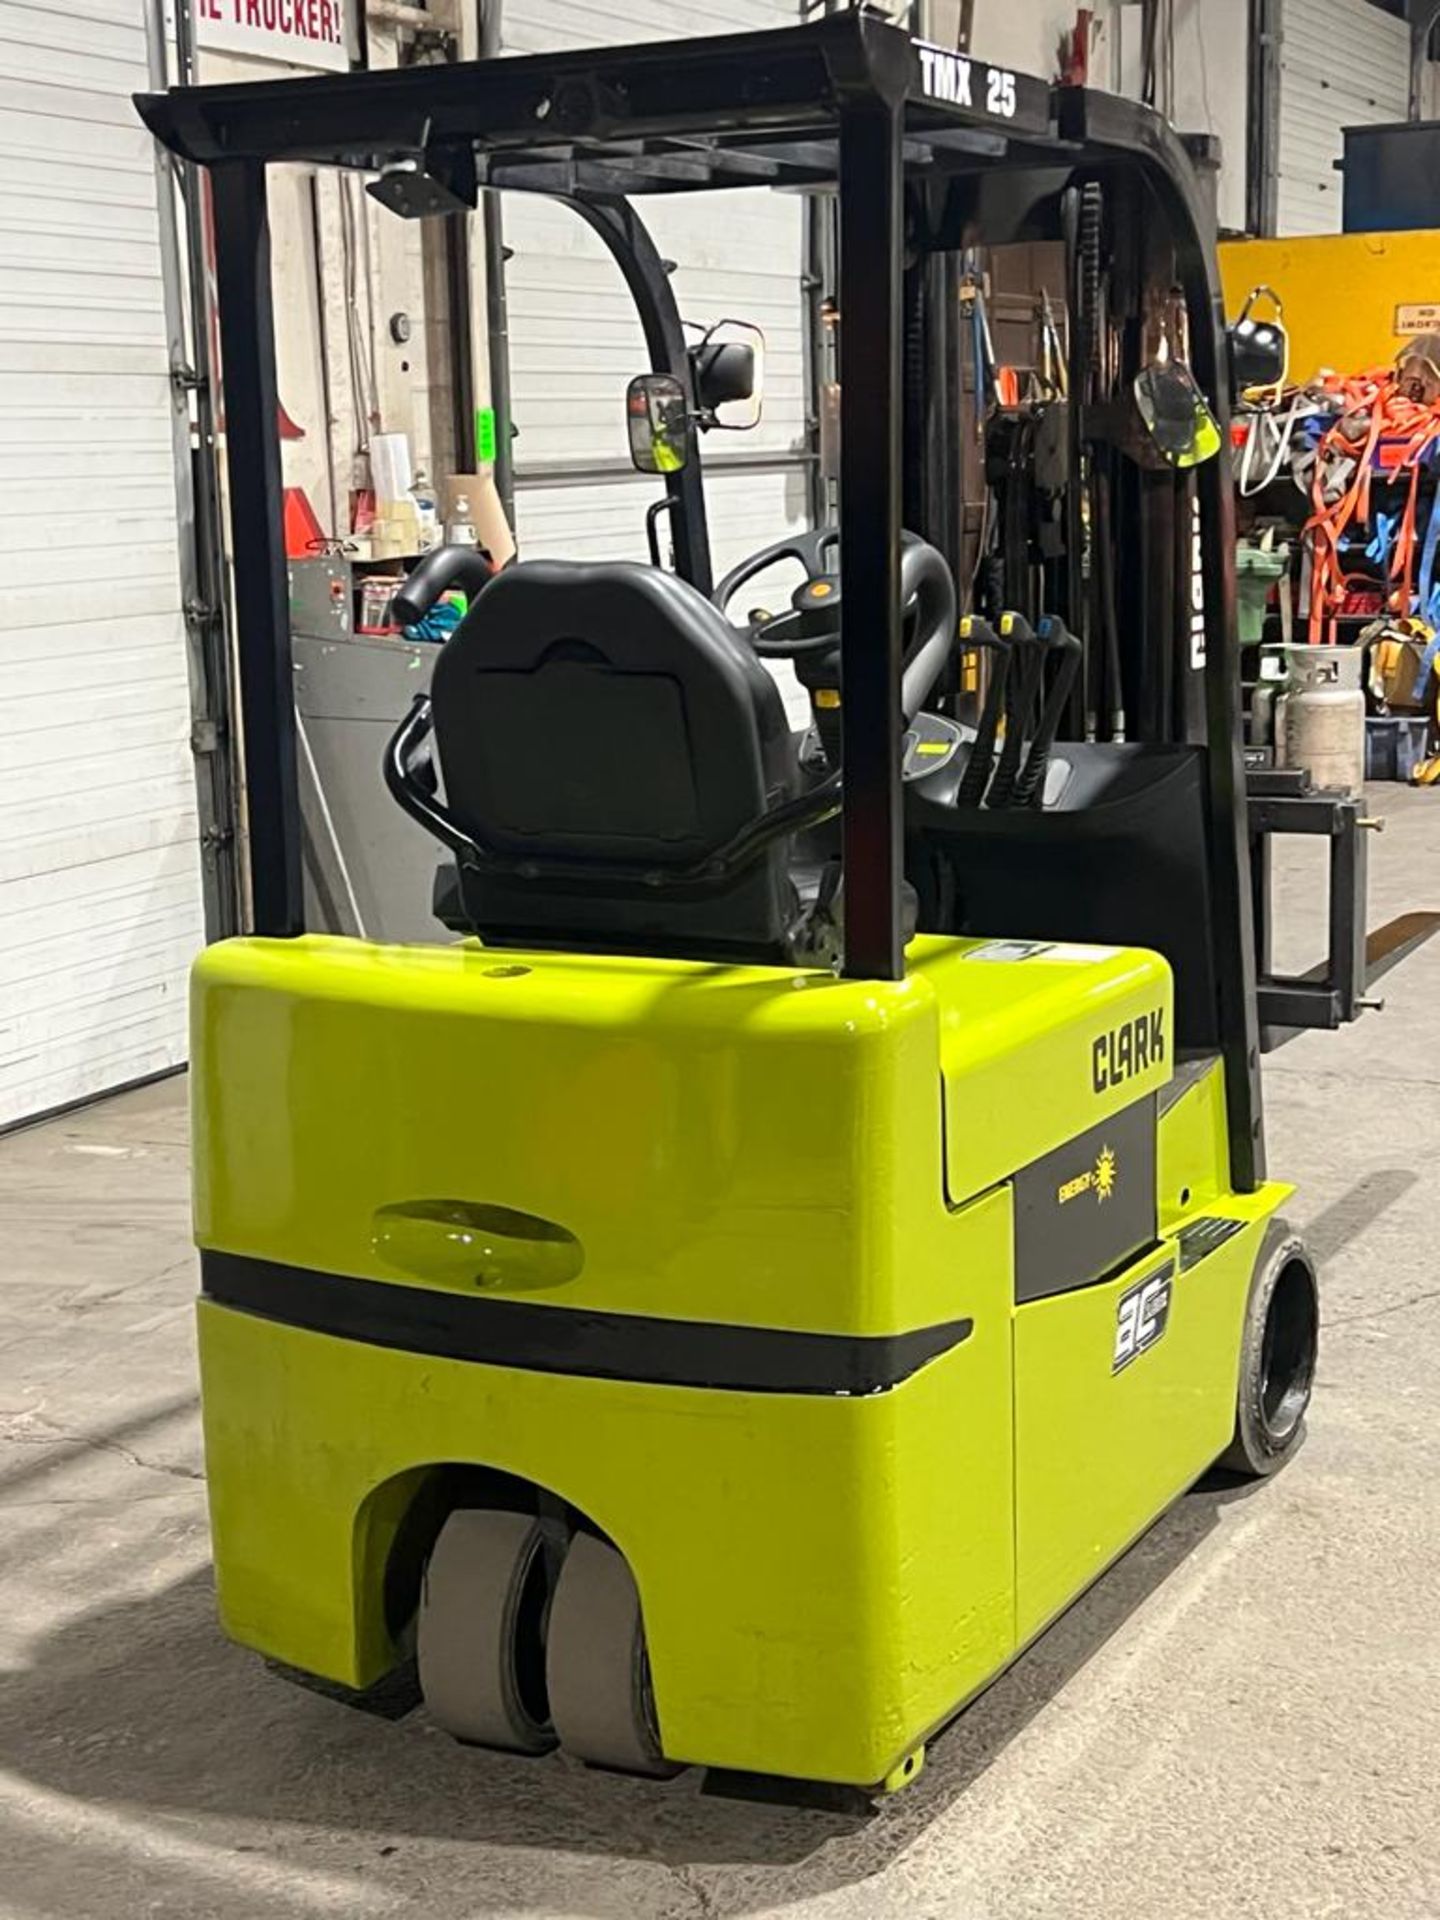 Clark 5,000lbs Capacity 3-Wheel Forklift 36V Electric with Low Hours with Sideshift - FREE CUSTOMS - Image 2 of 3